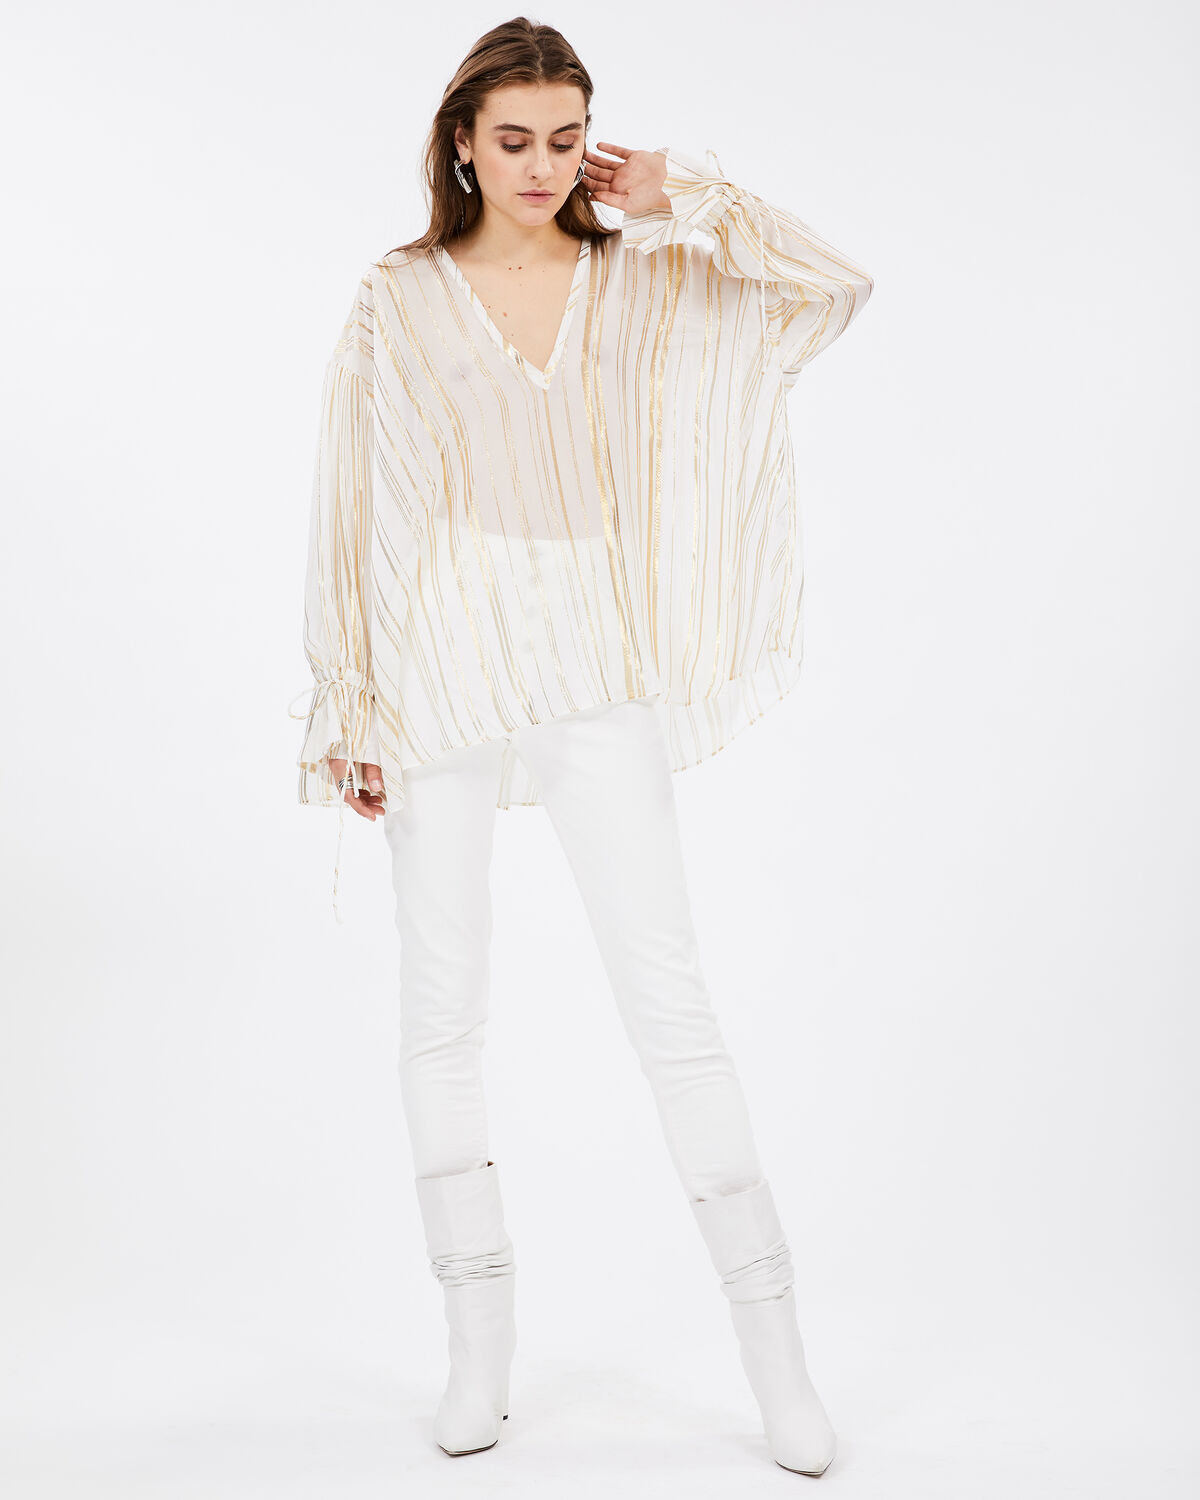 Photo of IRO Paris Adore Top Ecru - Light And Fluid, This Transparent Top Is Distinguished By Its Fine Lurex Stripes And Oversized Fit. Tightenable At The Wrists, Wear It With White Skinny Jeans For A Modern Look. New In